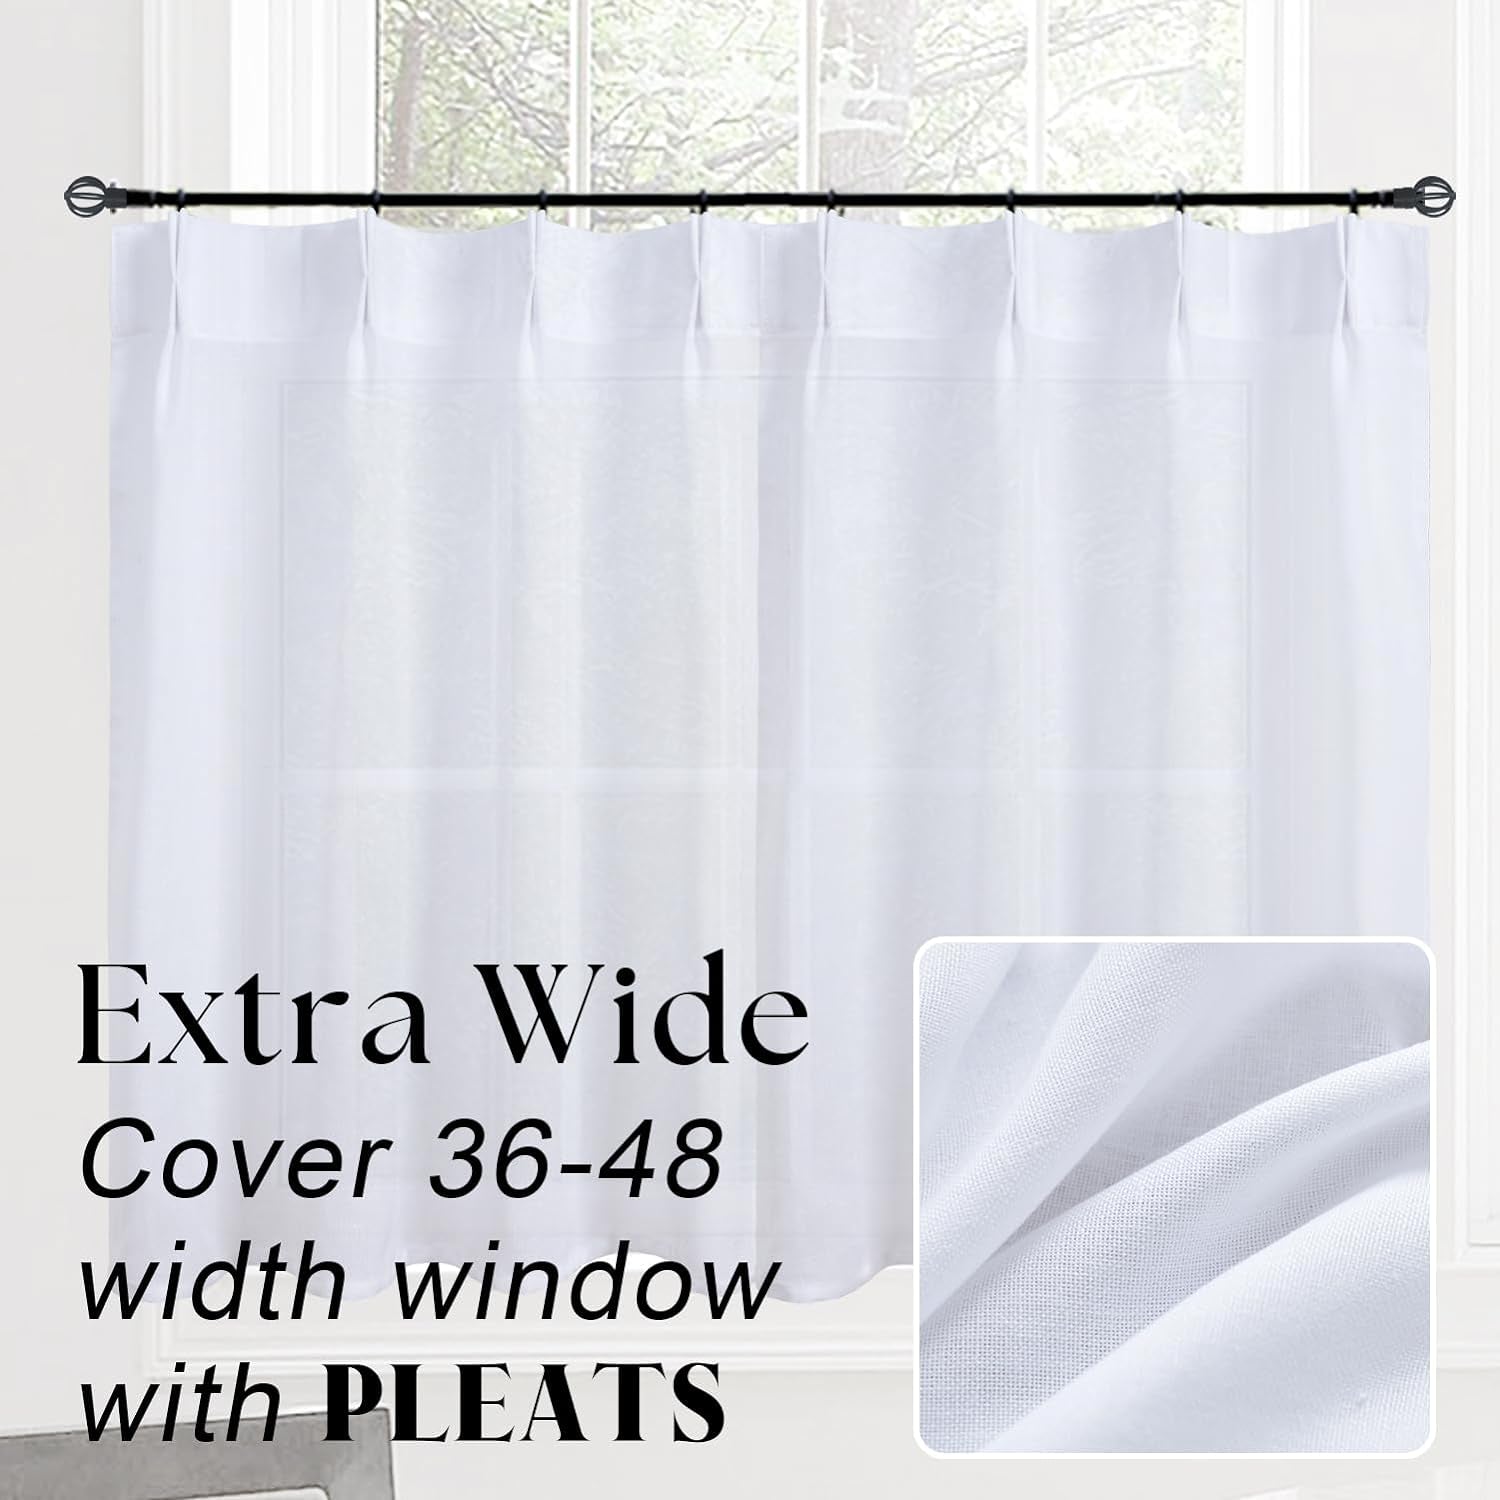 Short Curtains for Windows,Semi Sheer White Linen Cotton Privacy Light Filtering Cafe Length Small Pinch Pleated Curtains for Living Room Bathroom with Hooks,24 X 24 Inch Long  Lino Rosa   